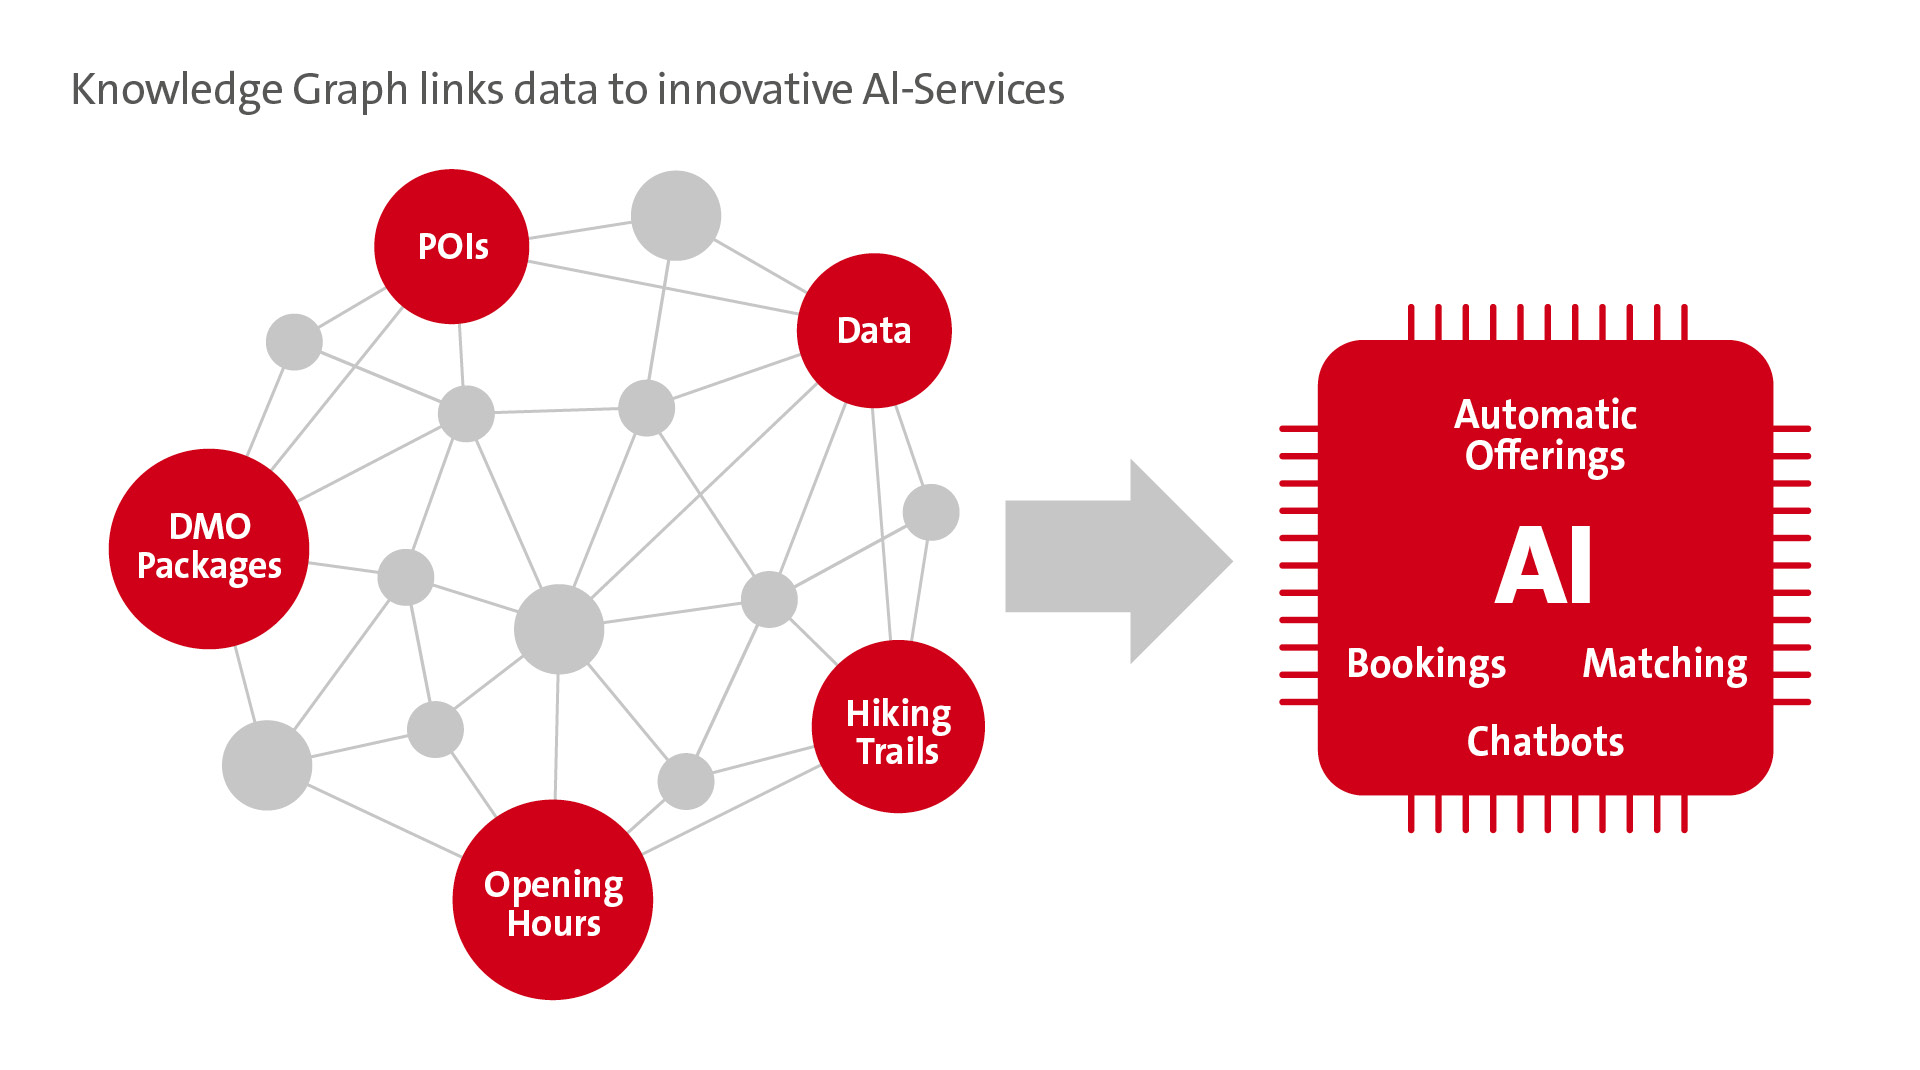 Graphic Knowledge Graph links data to innovative AI services